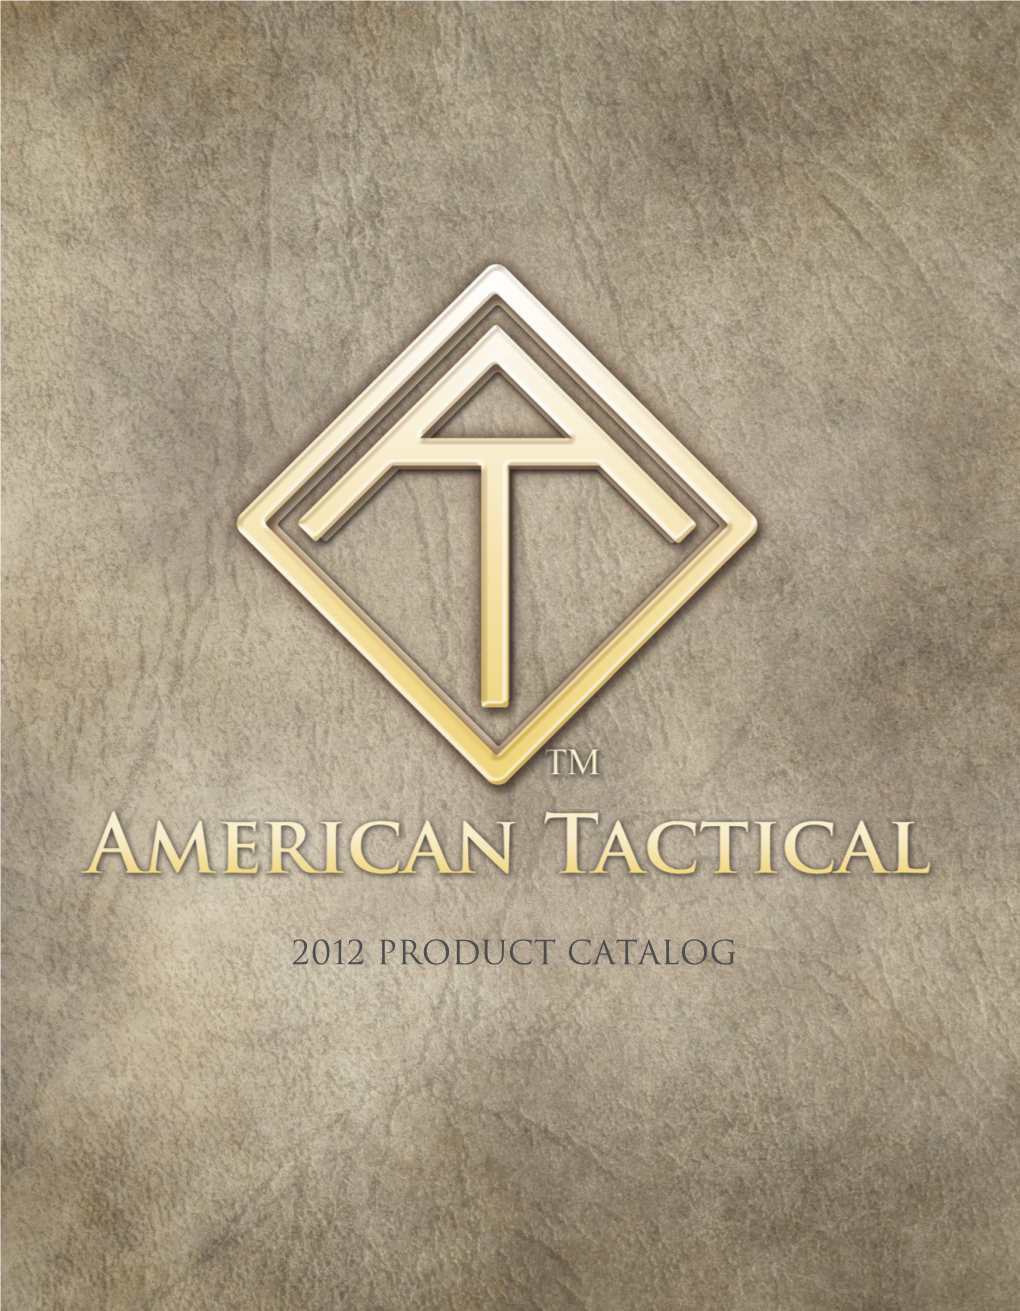 2012 PRODUCT CATALOG 2 ATI Warranty Service Policy & Procedure Safety